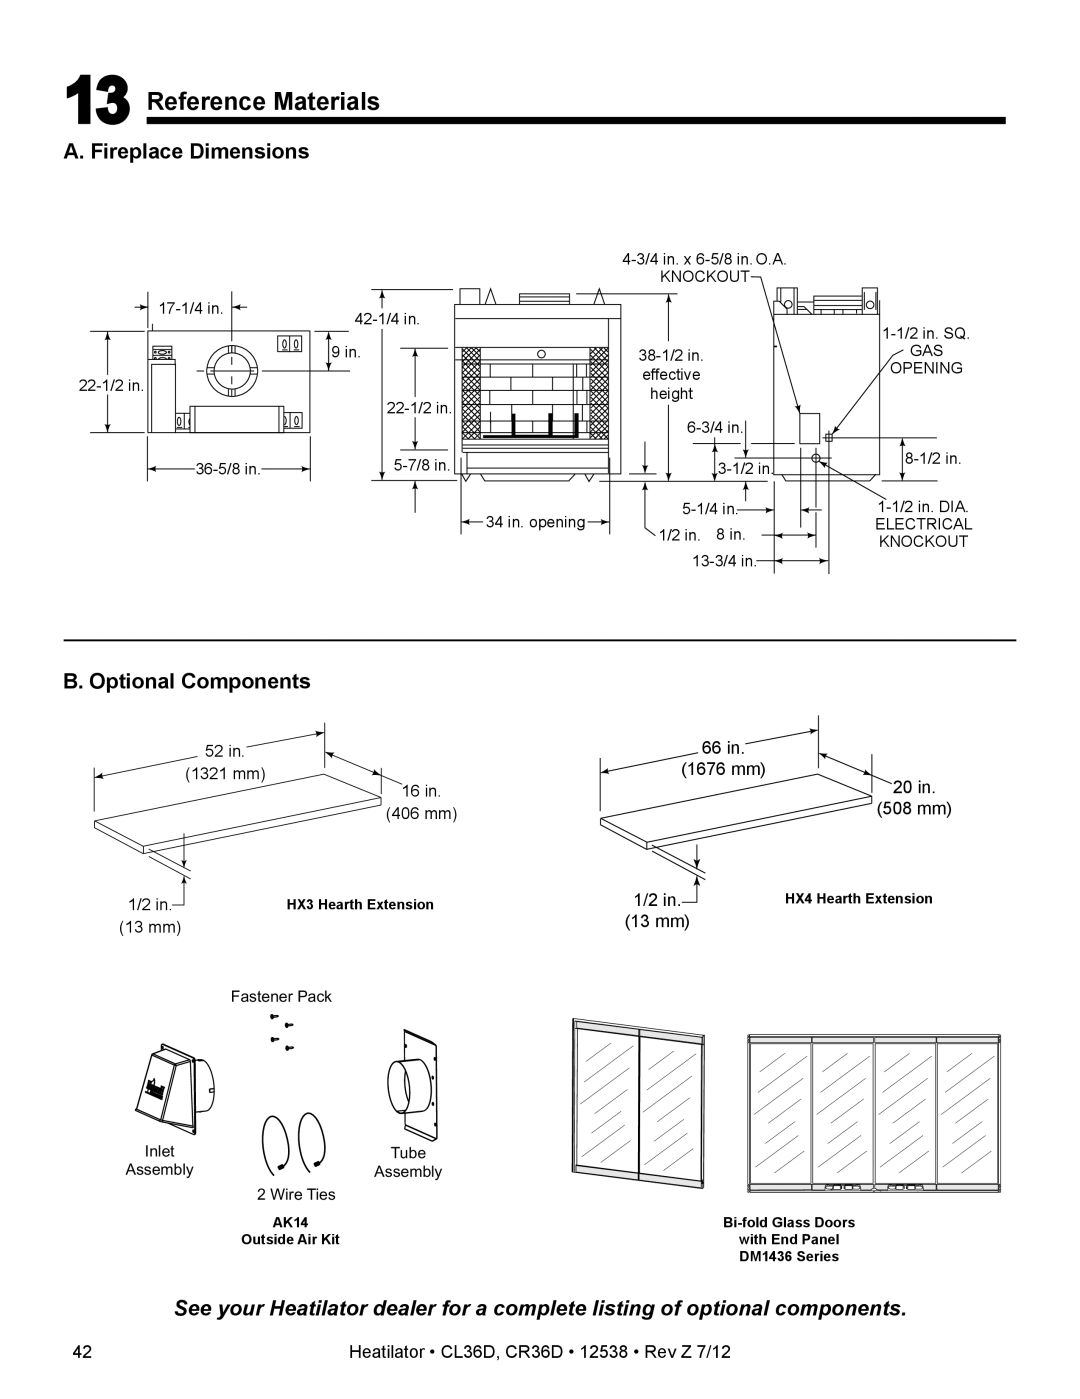 Heatiator CL36D owner manual Reference Materials, A. Fireplace Dimensions, B. Optional Components 